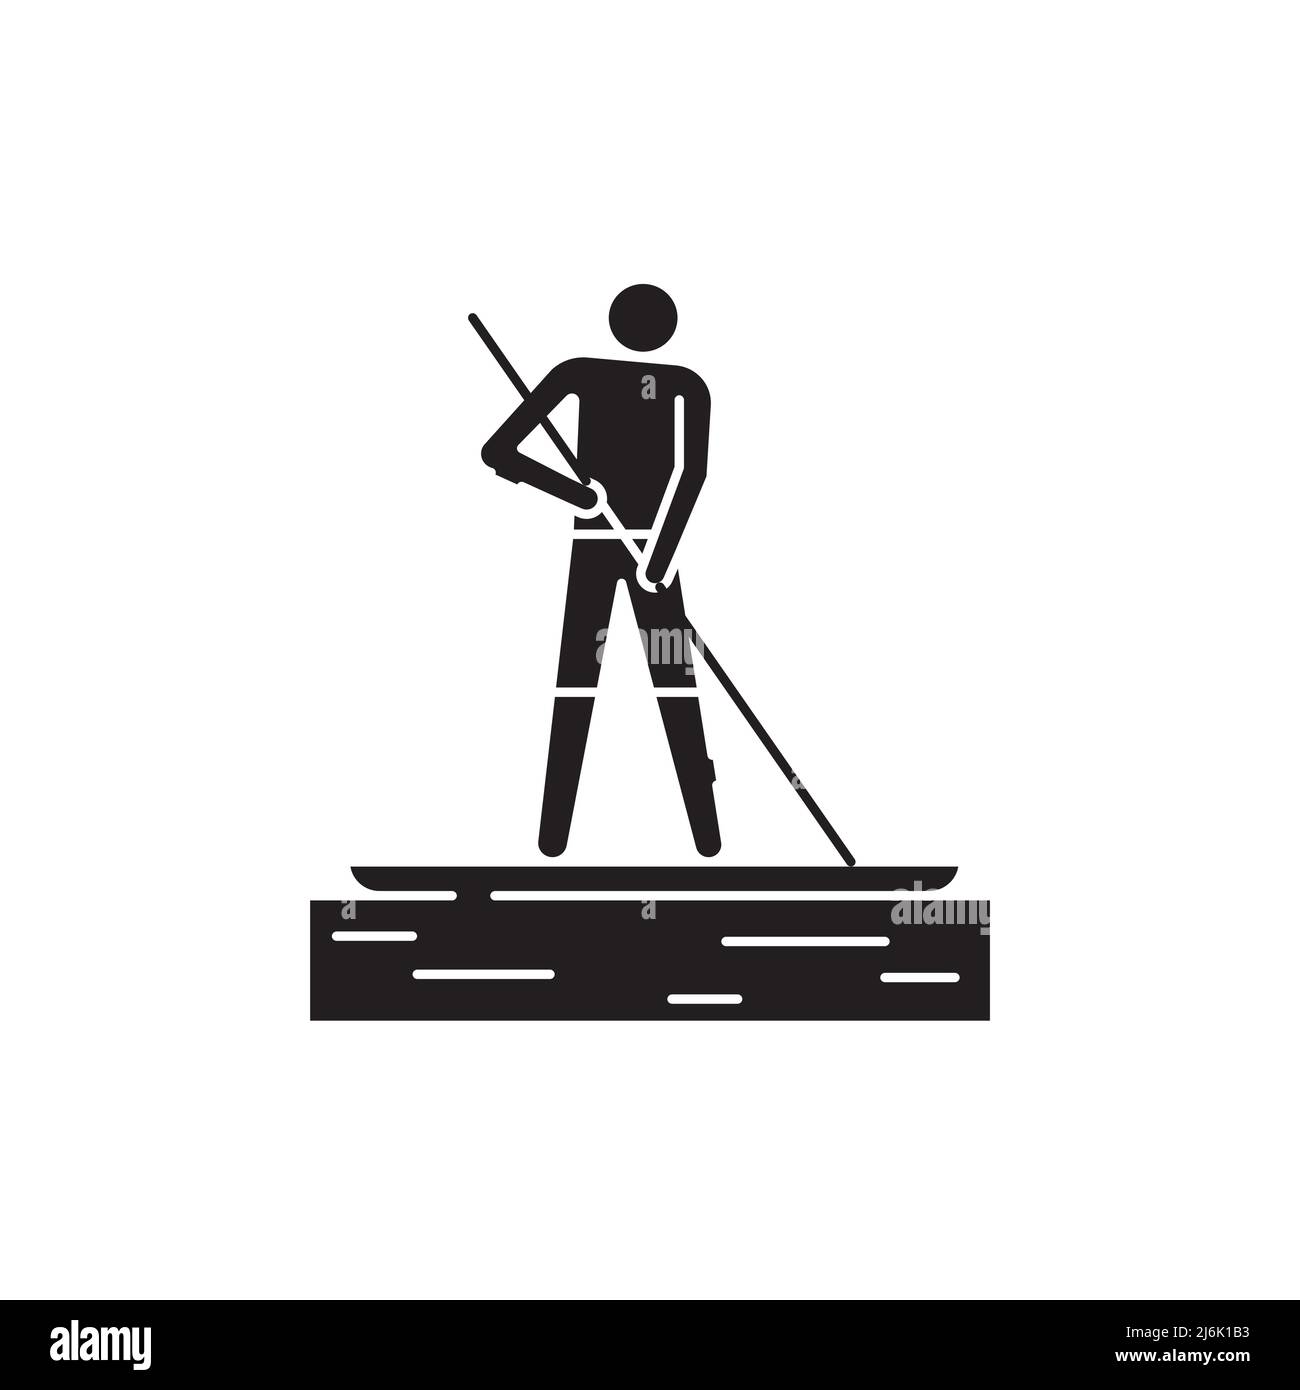 Paddleboarding color line icon. Isolated vector element. Outline pictogram for web page, mobile app, promo Stock Vector